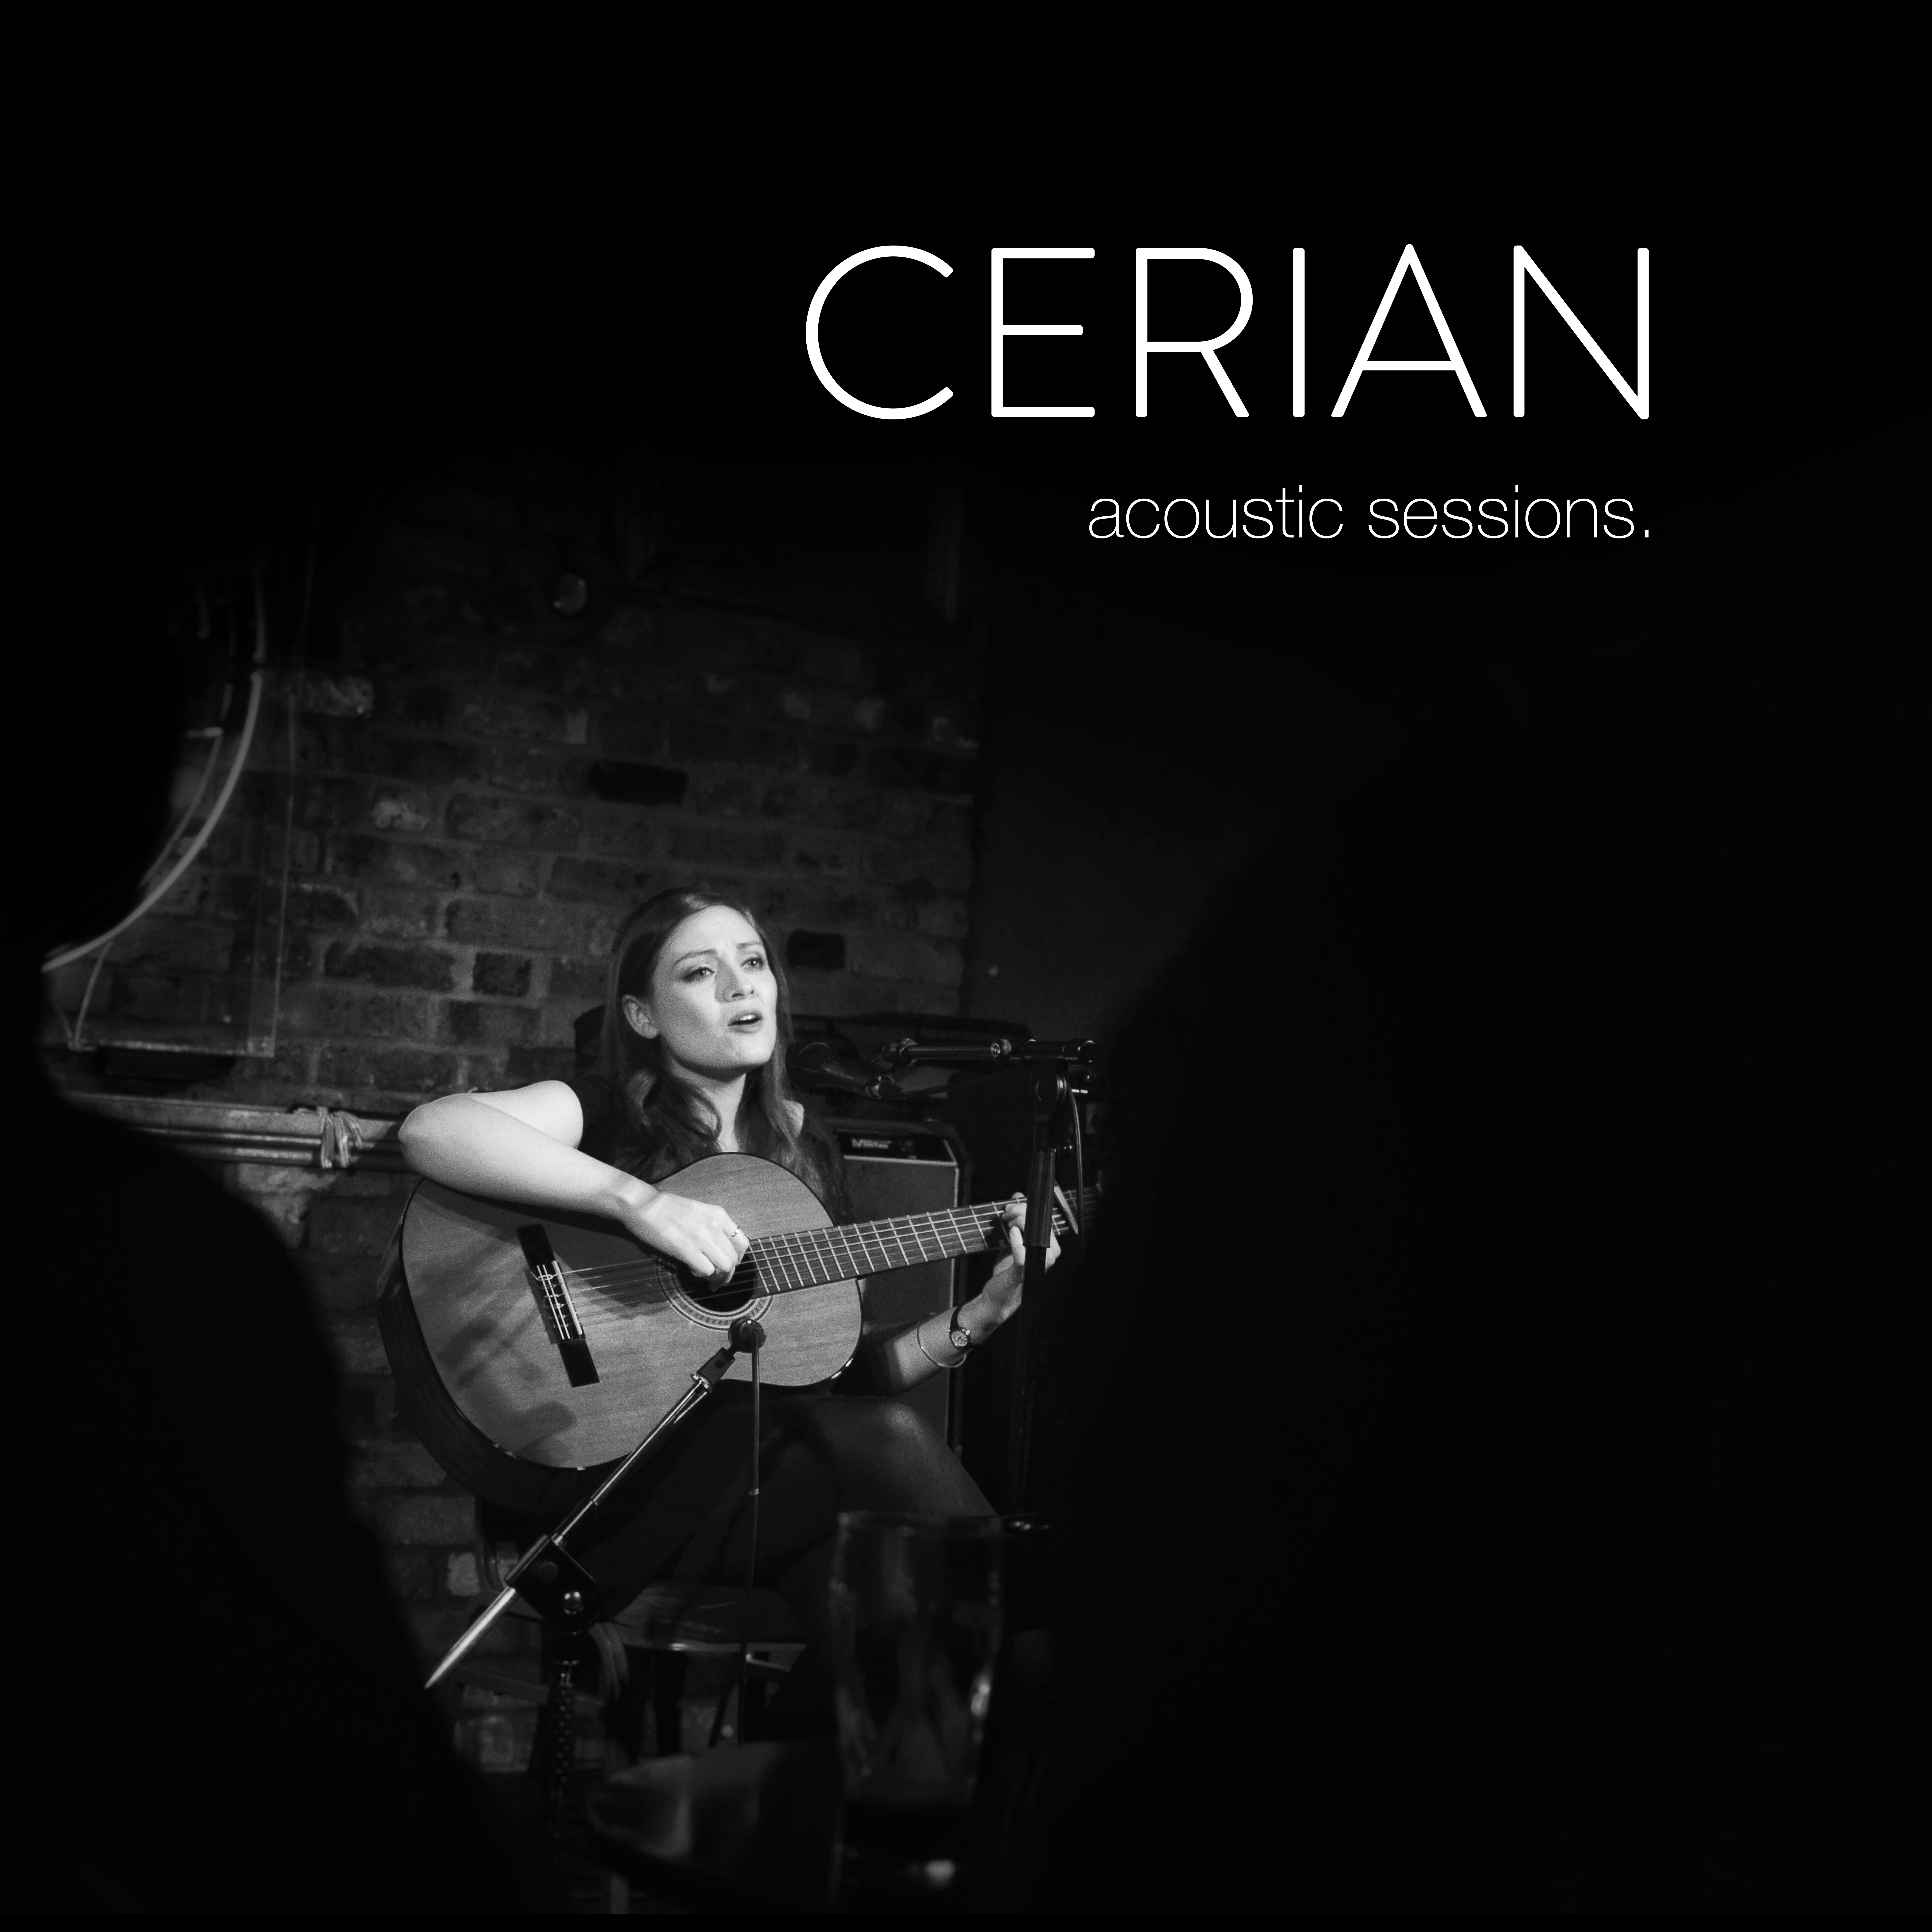 acoustic sessions - Cerian